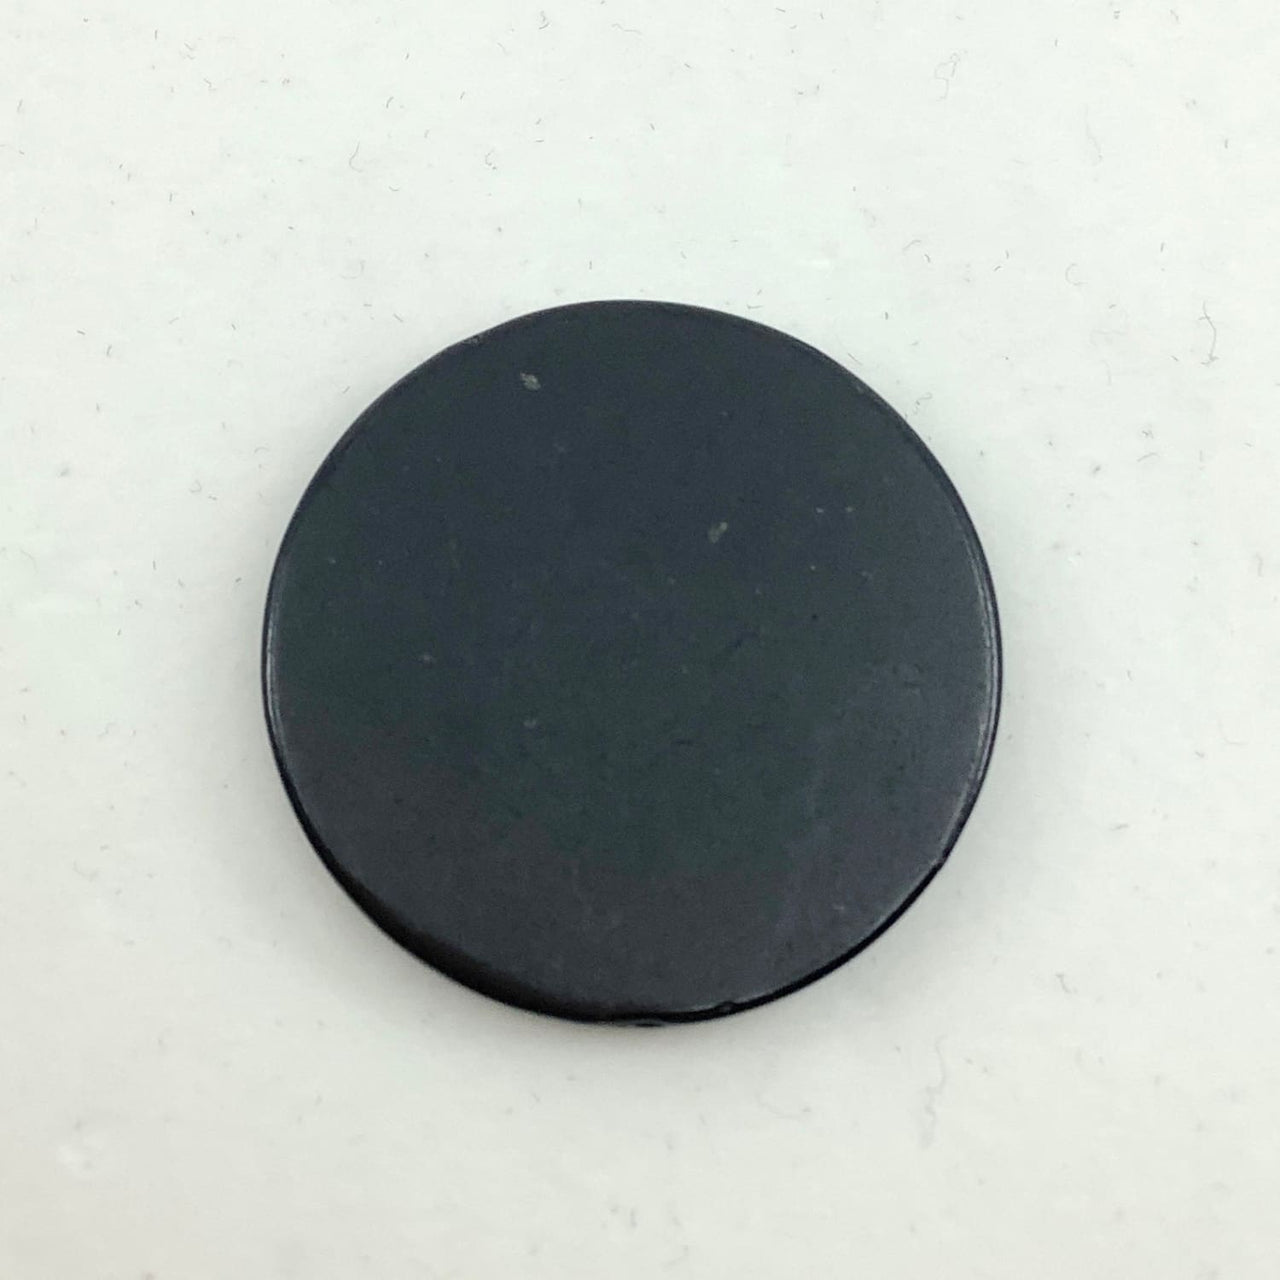 1 Shungite Adhesive Disc for phone for protection from EMF 